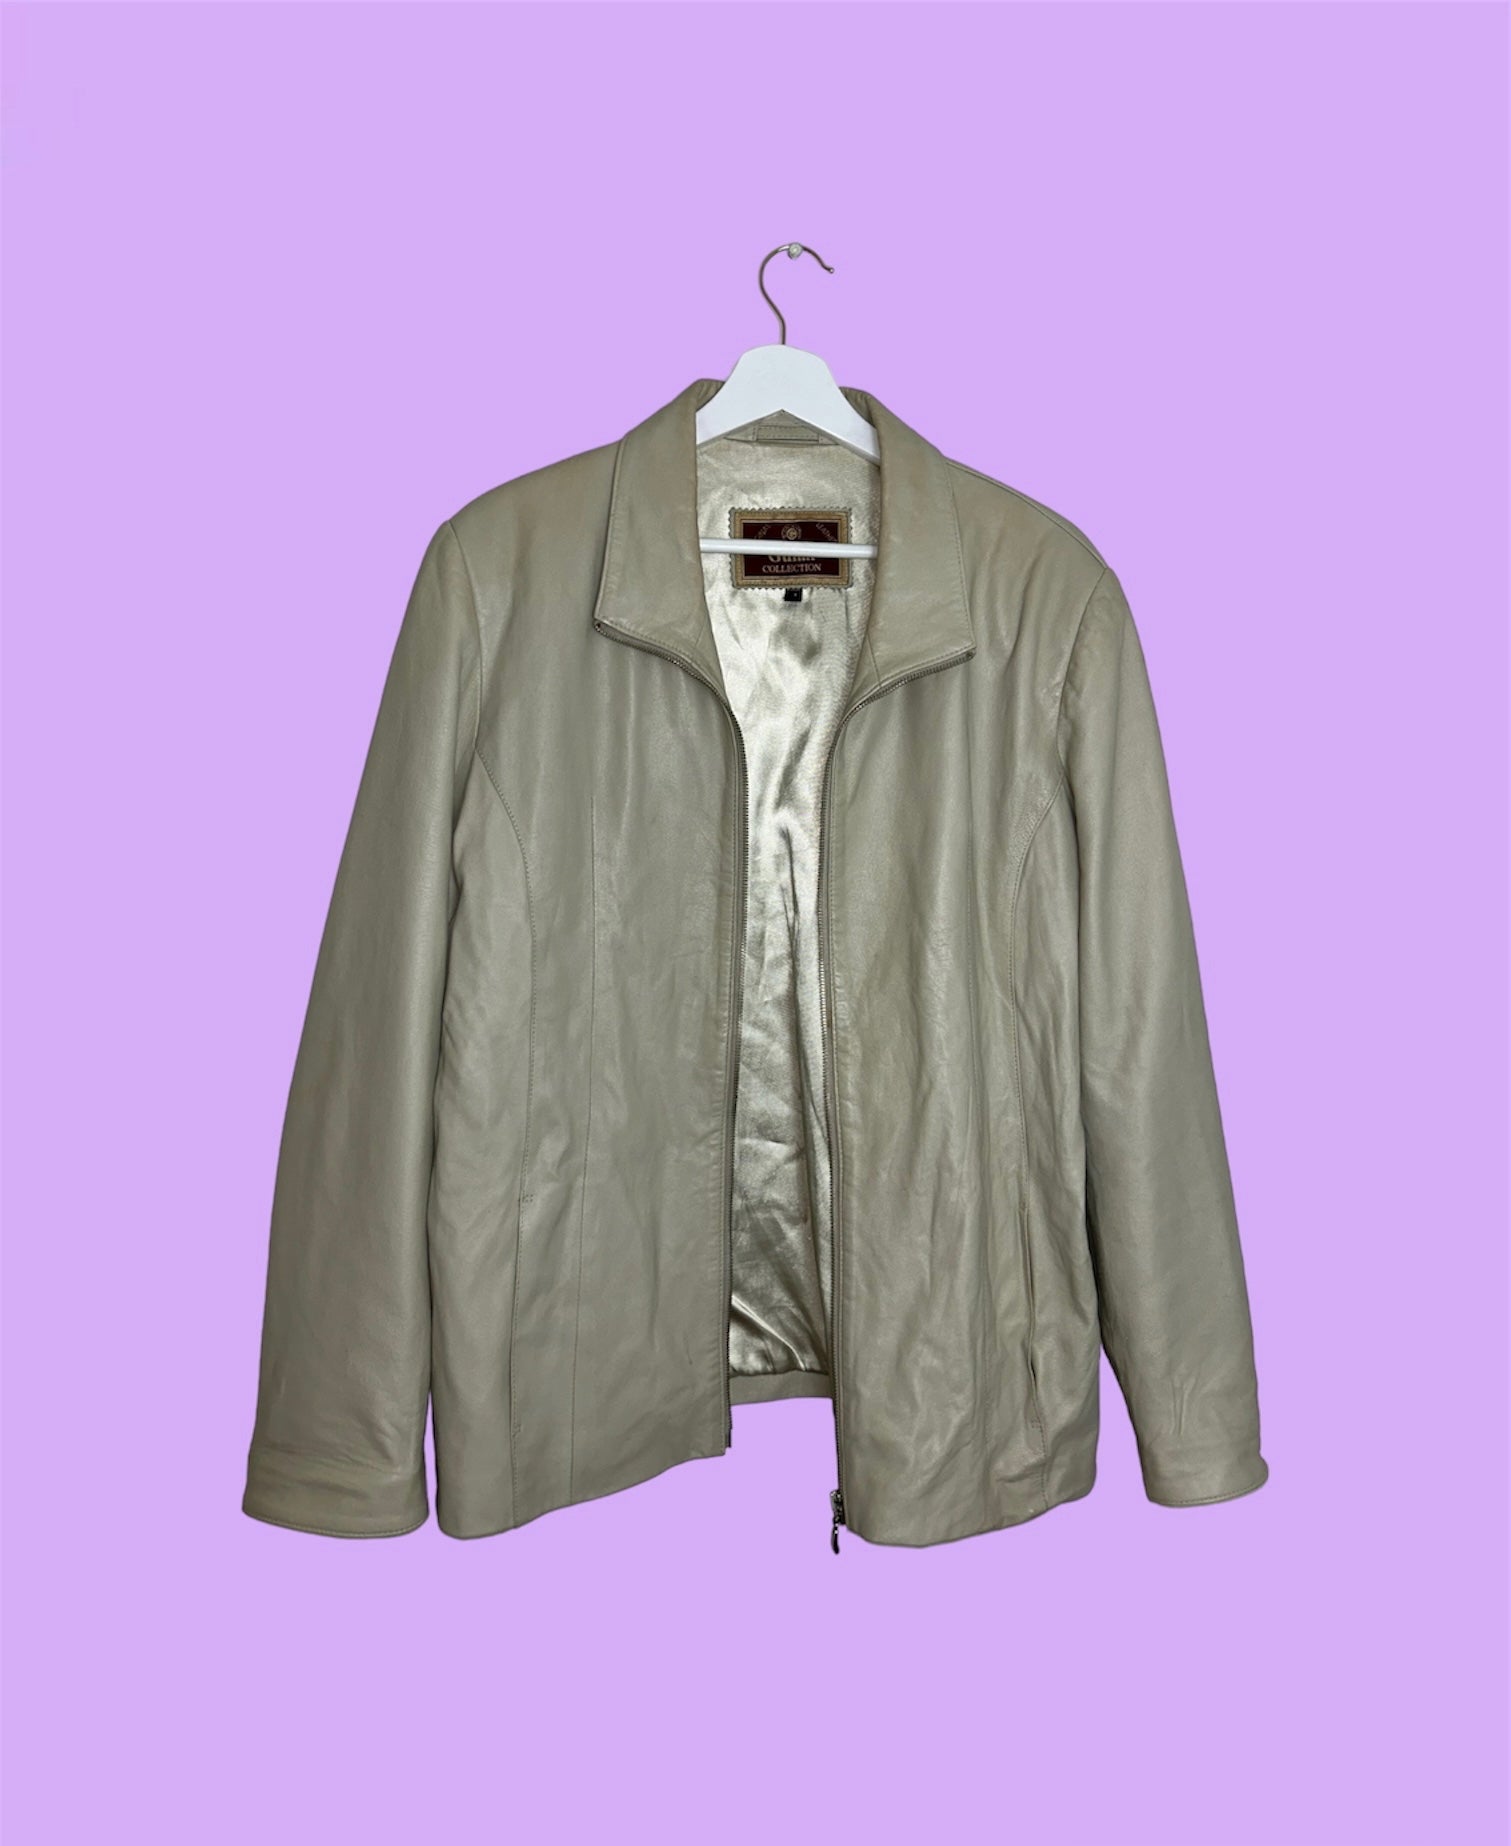 beige leather zip up jacket shown on a lilac background